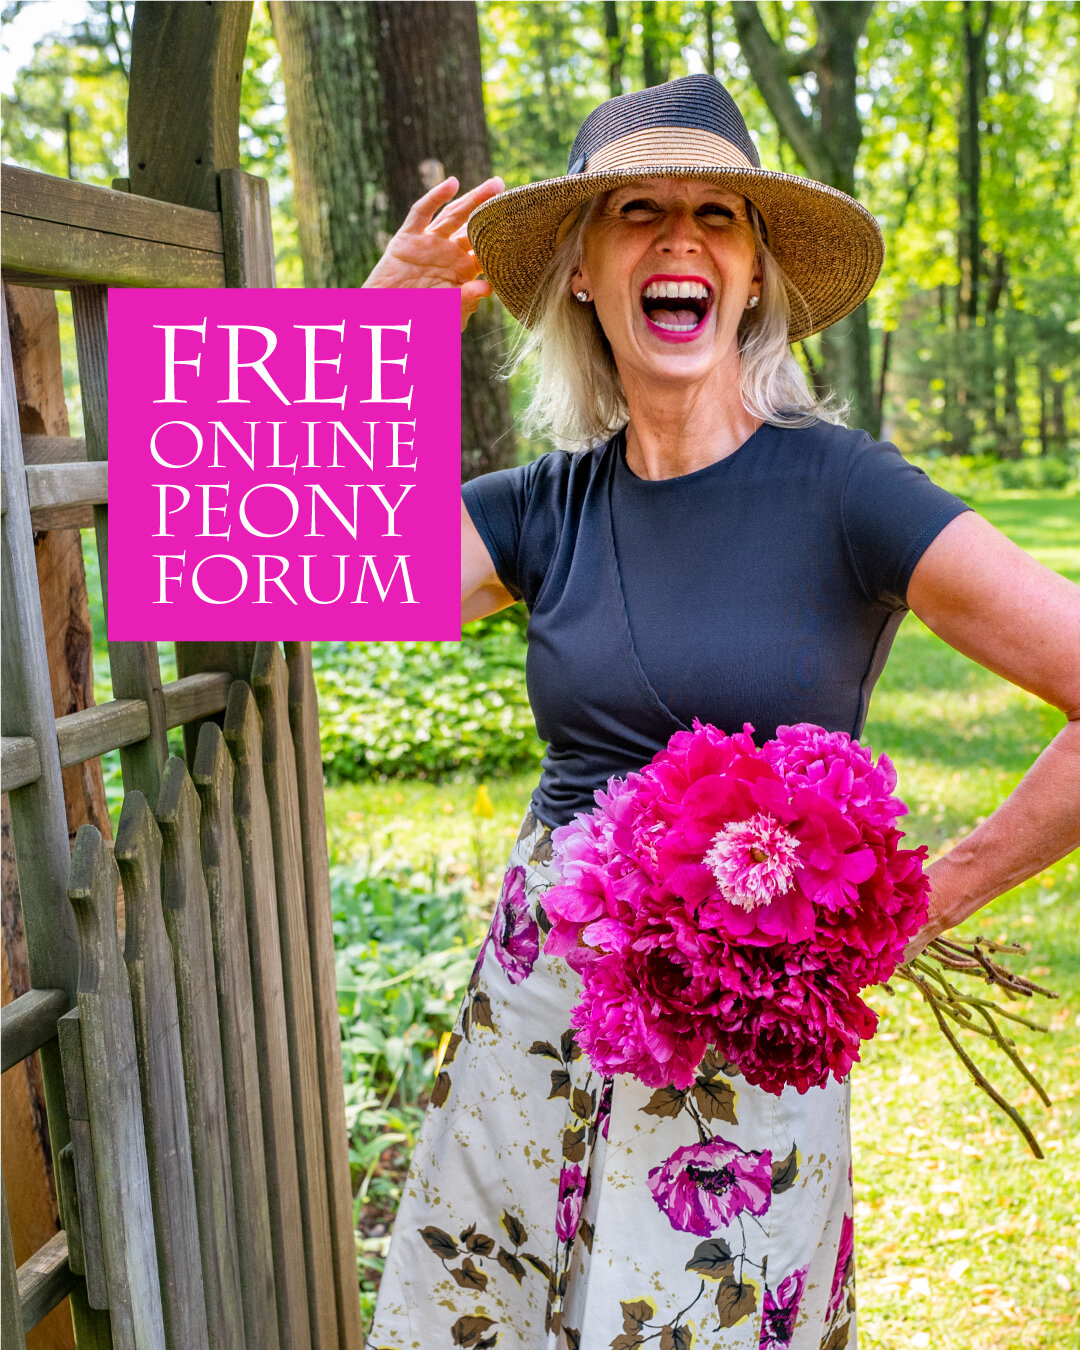 Join Us Thursday January 18th, 10:00am EST. Free Online Peony Forum

Want to have even better peonies? Learn tips on growing and caring for beautiful peonies in our next online peony forum hosted by Kathleen Gagan, owner and founder of Peony's Envy. 